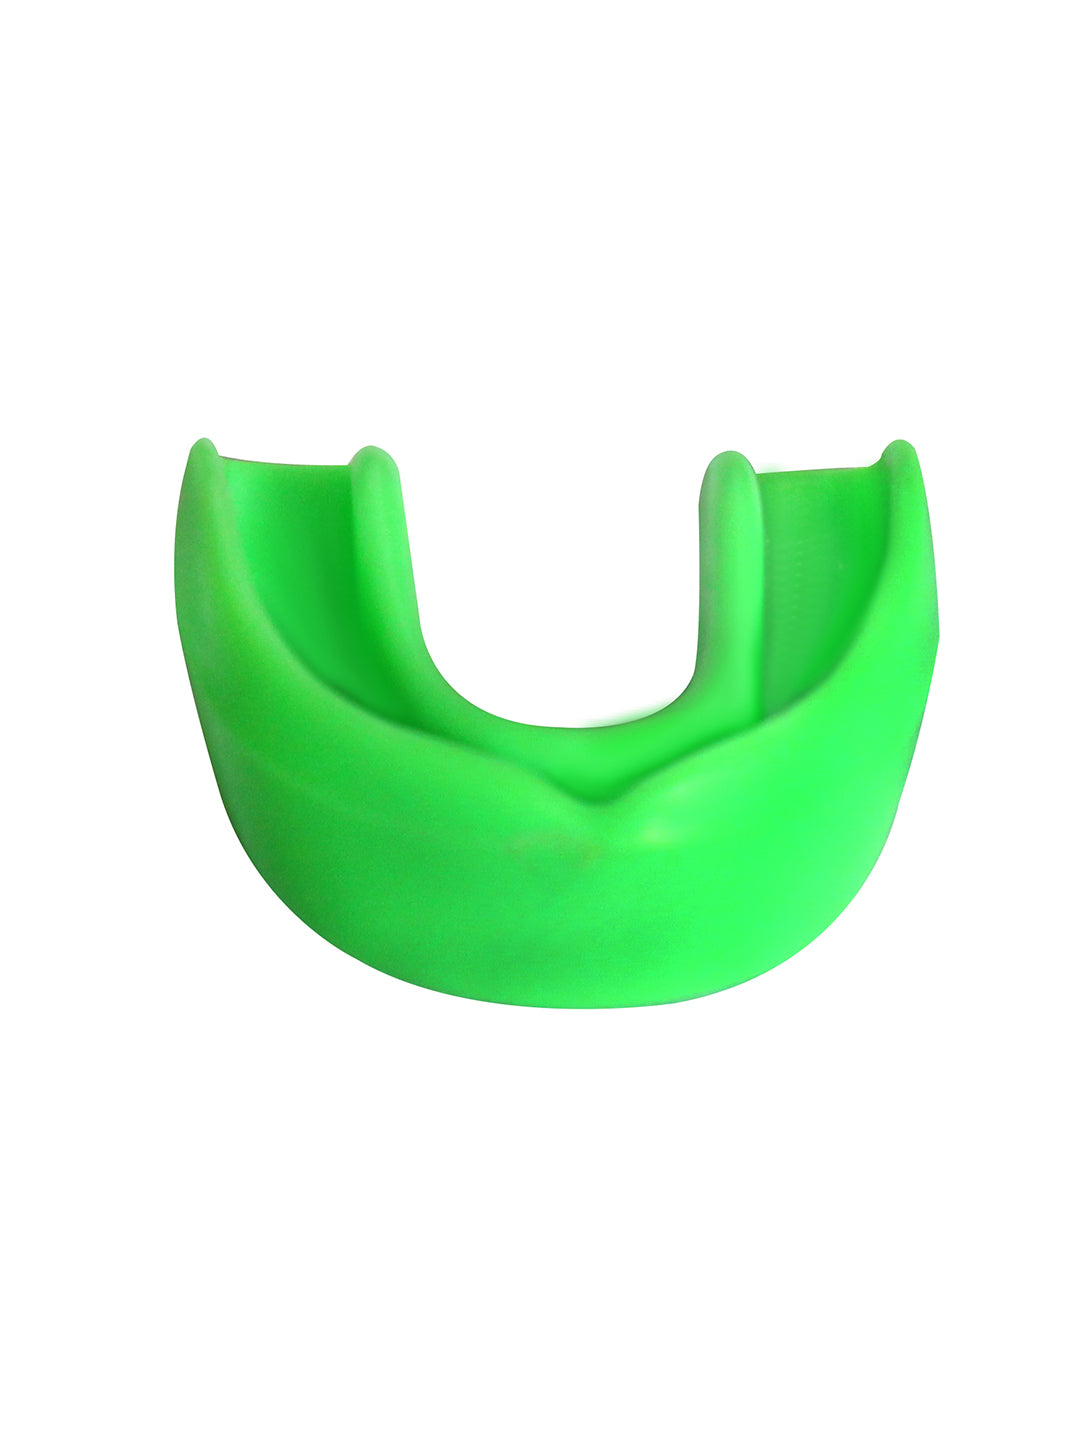 Invincible Classic Style Mouth Guards